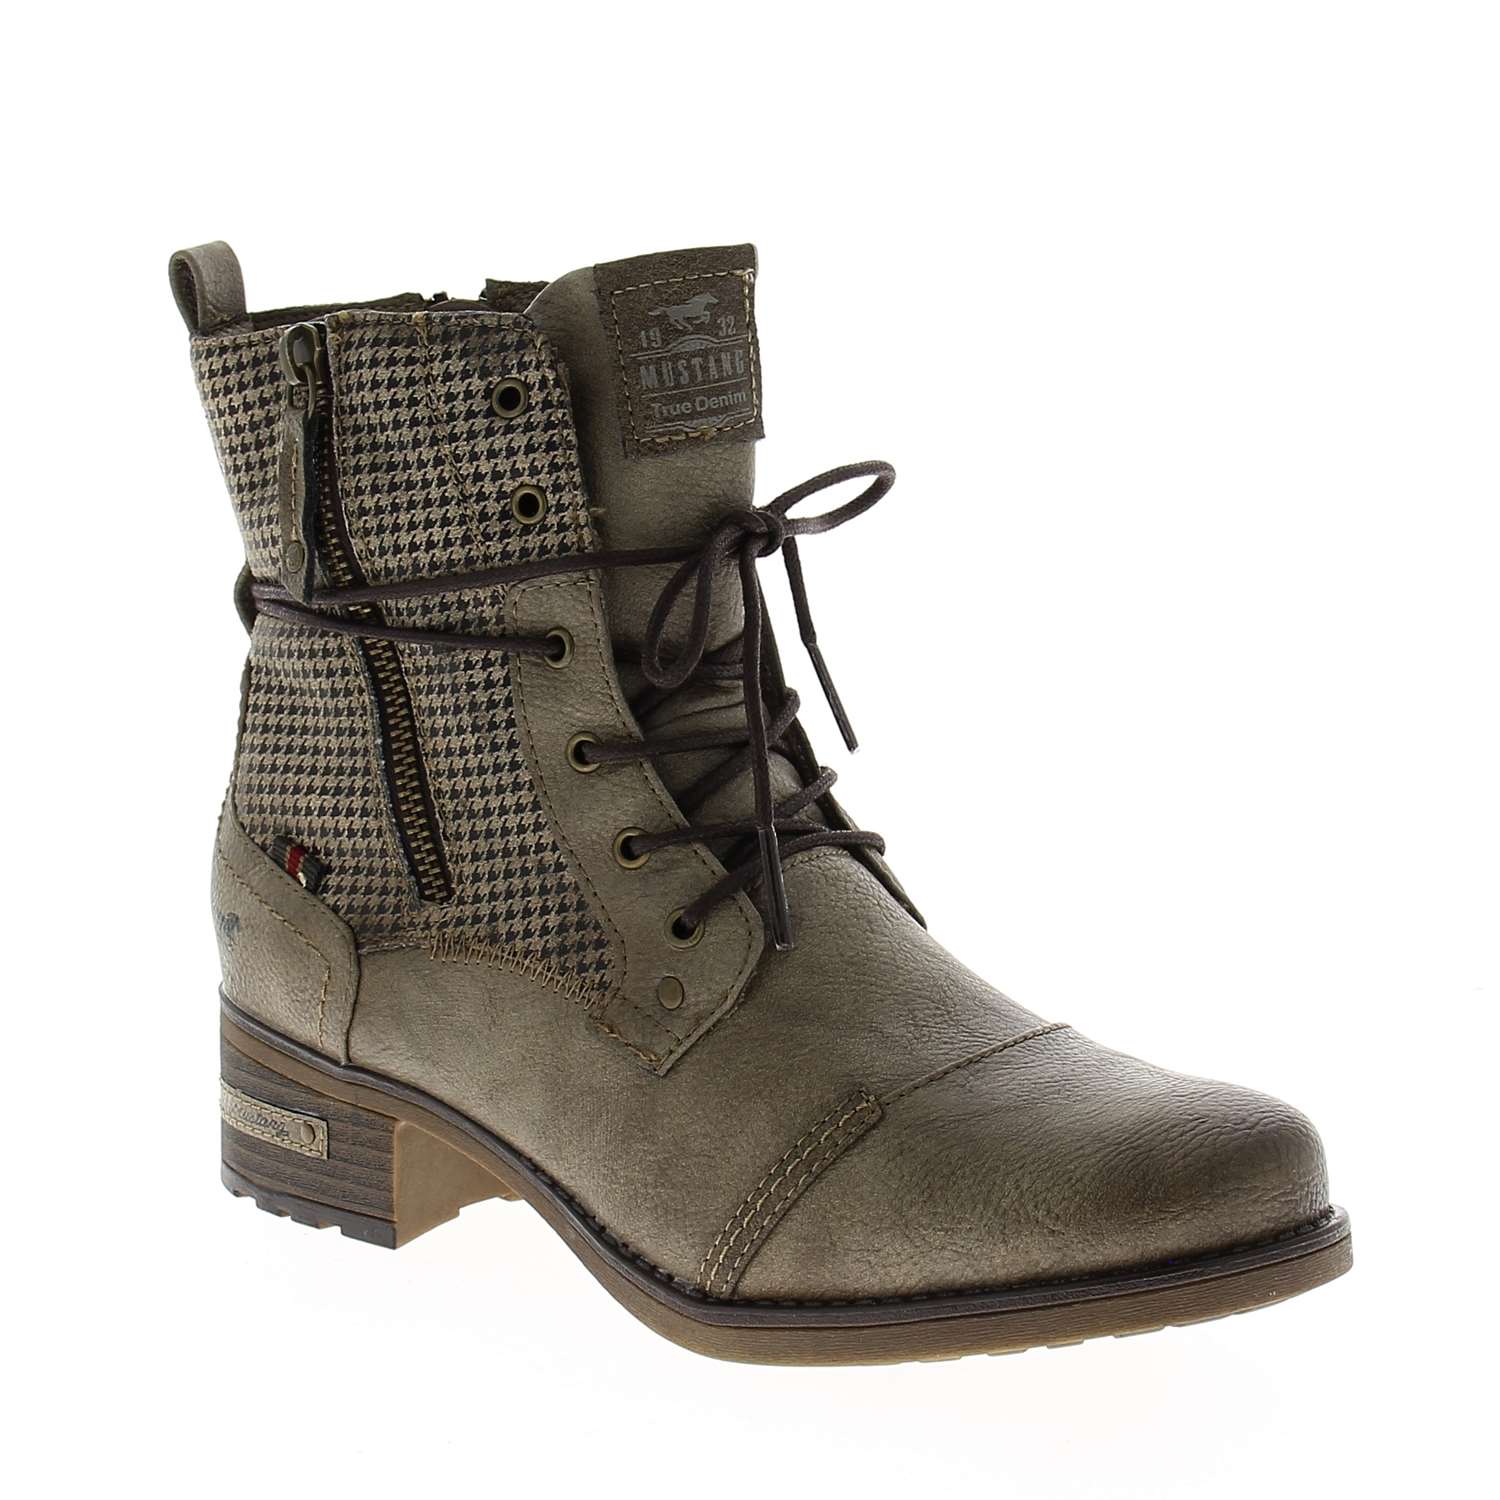 01 - MUKKO - MUSTANG - Boots et bottines - Synthétique